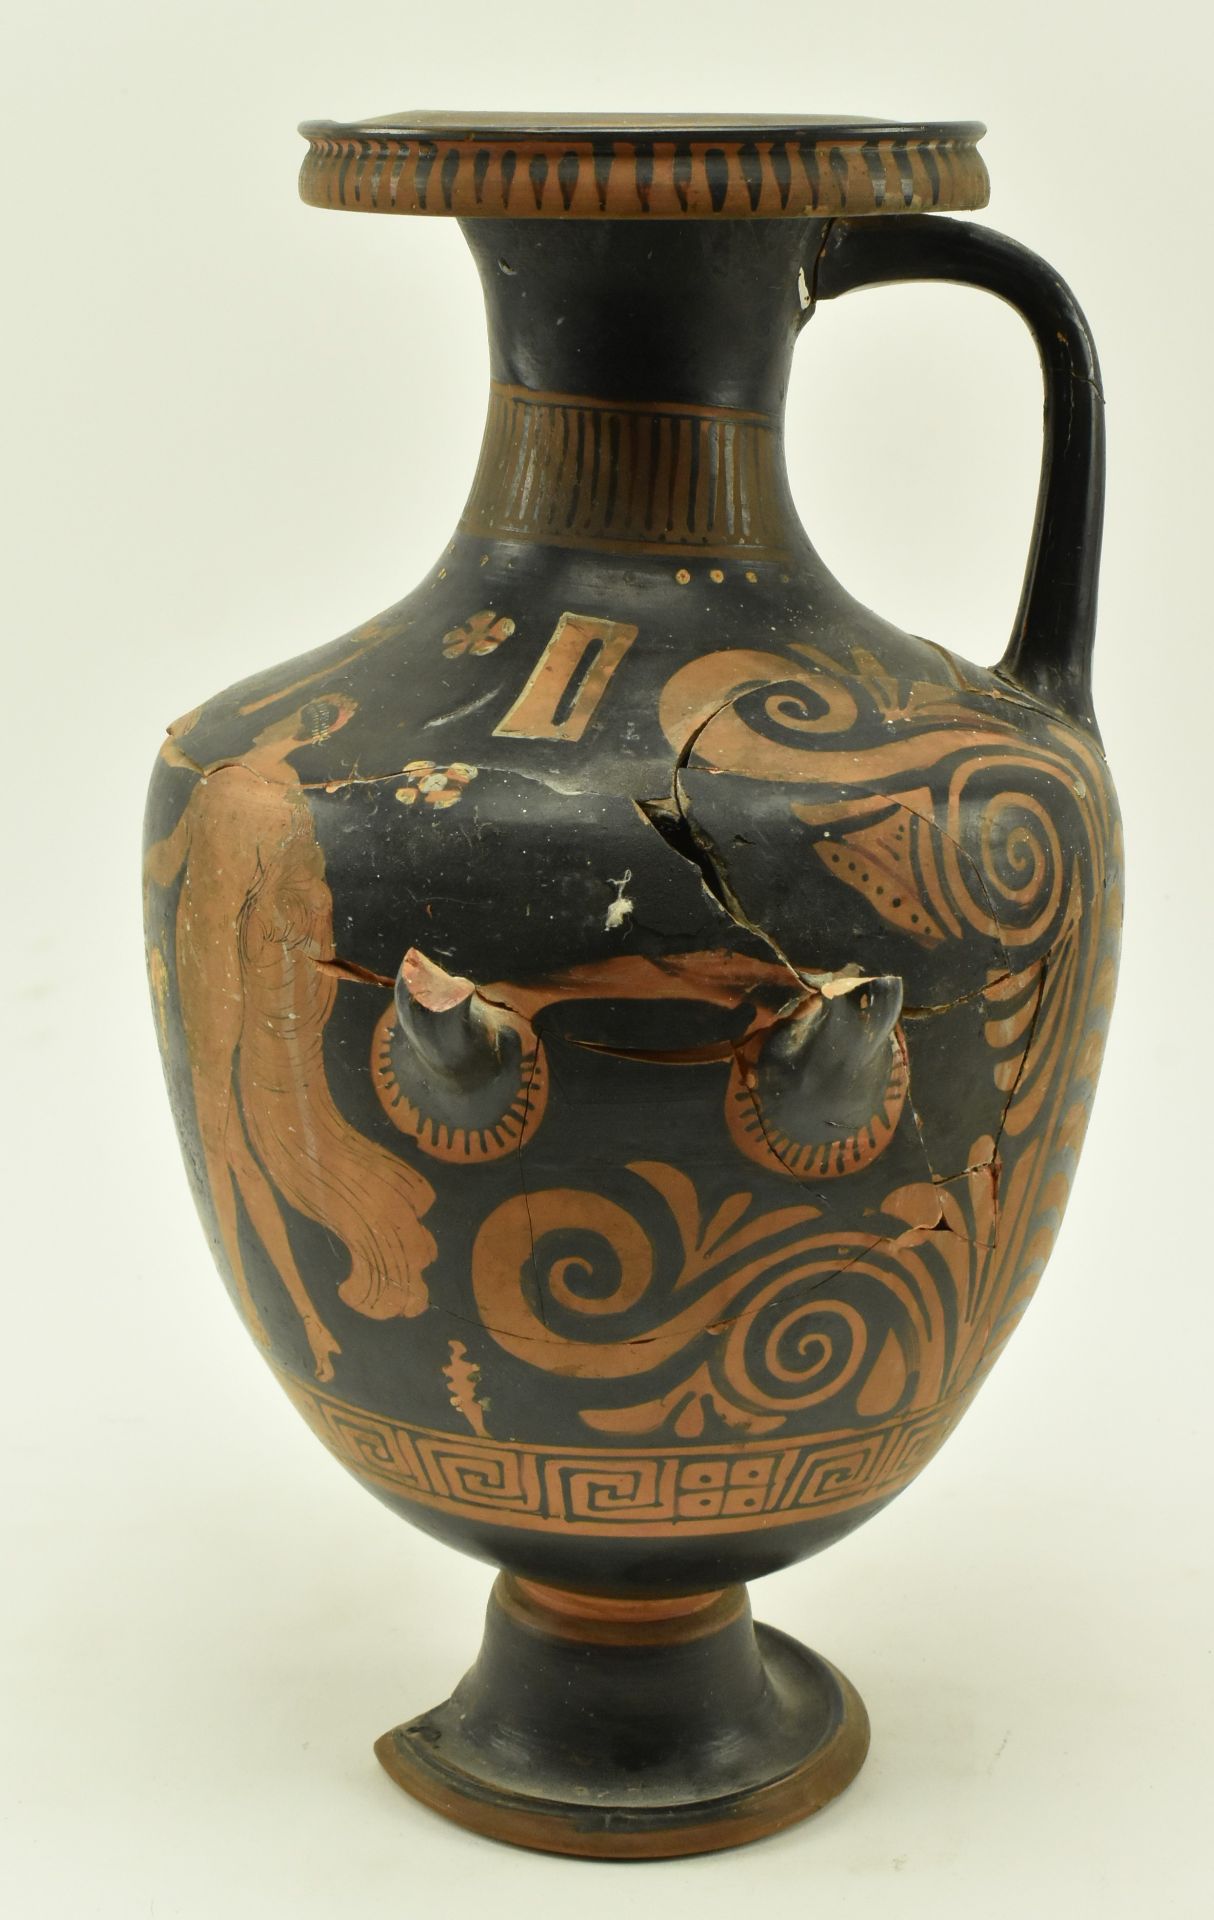 AFTER APULIAN (GREEK) - HAND PAINTED TERRACOTTA HYDRIA VASE - Image 4 of 9